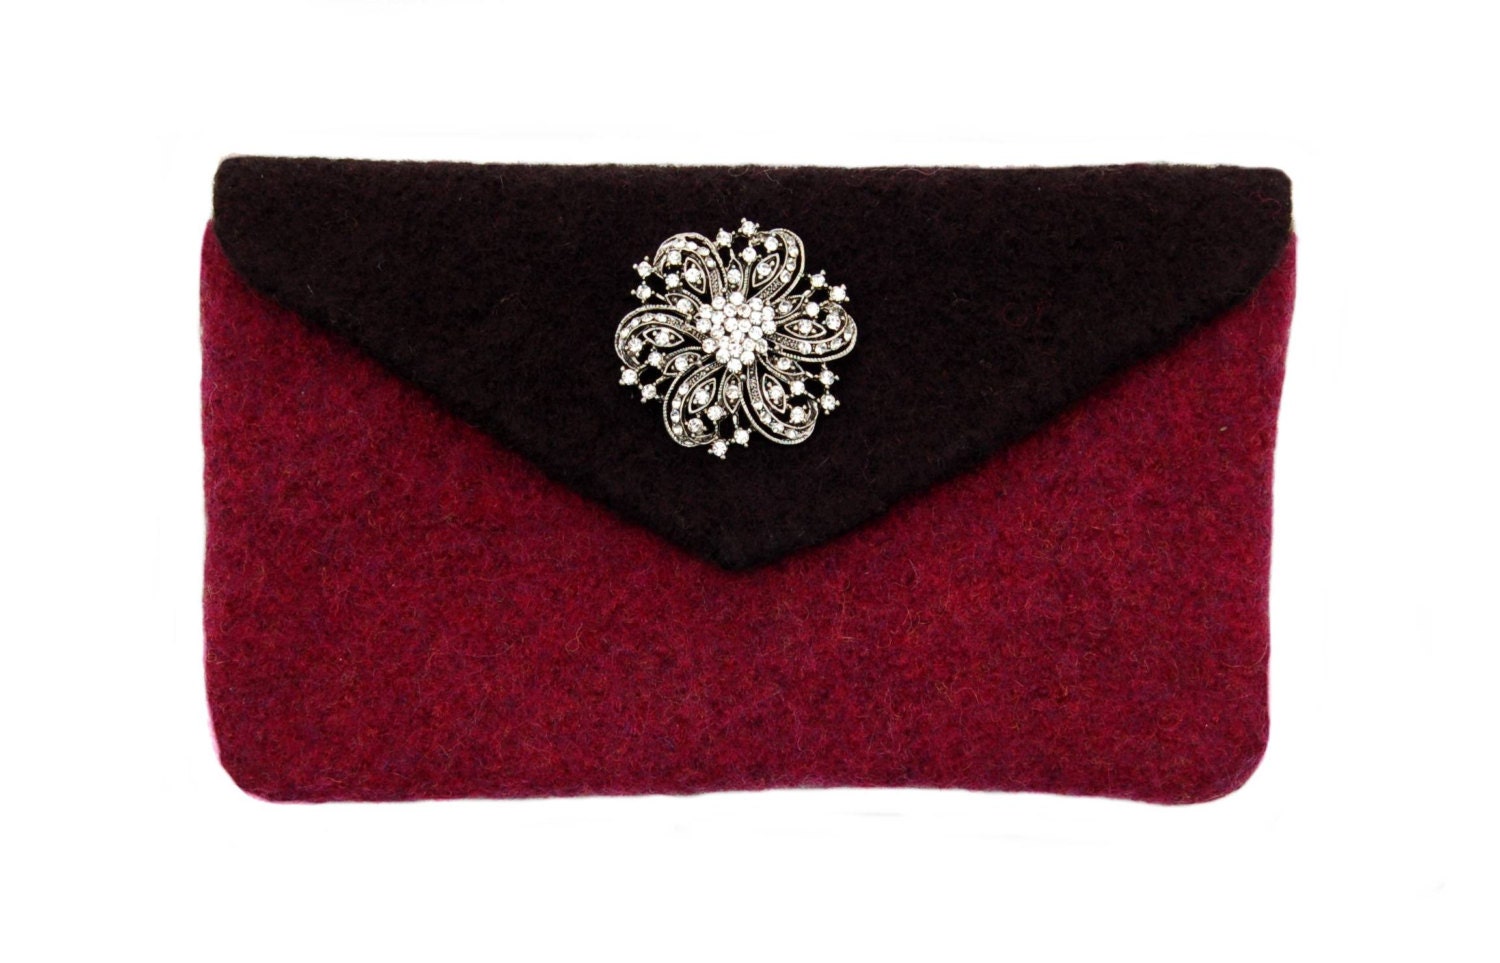 Raspberry and Black Felted Clutch Felted clutch complete